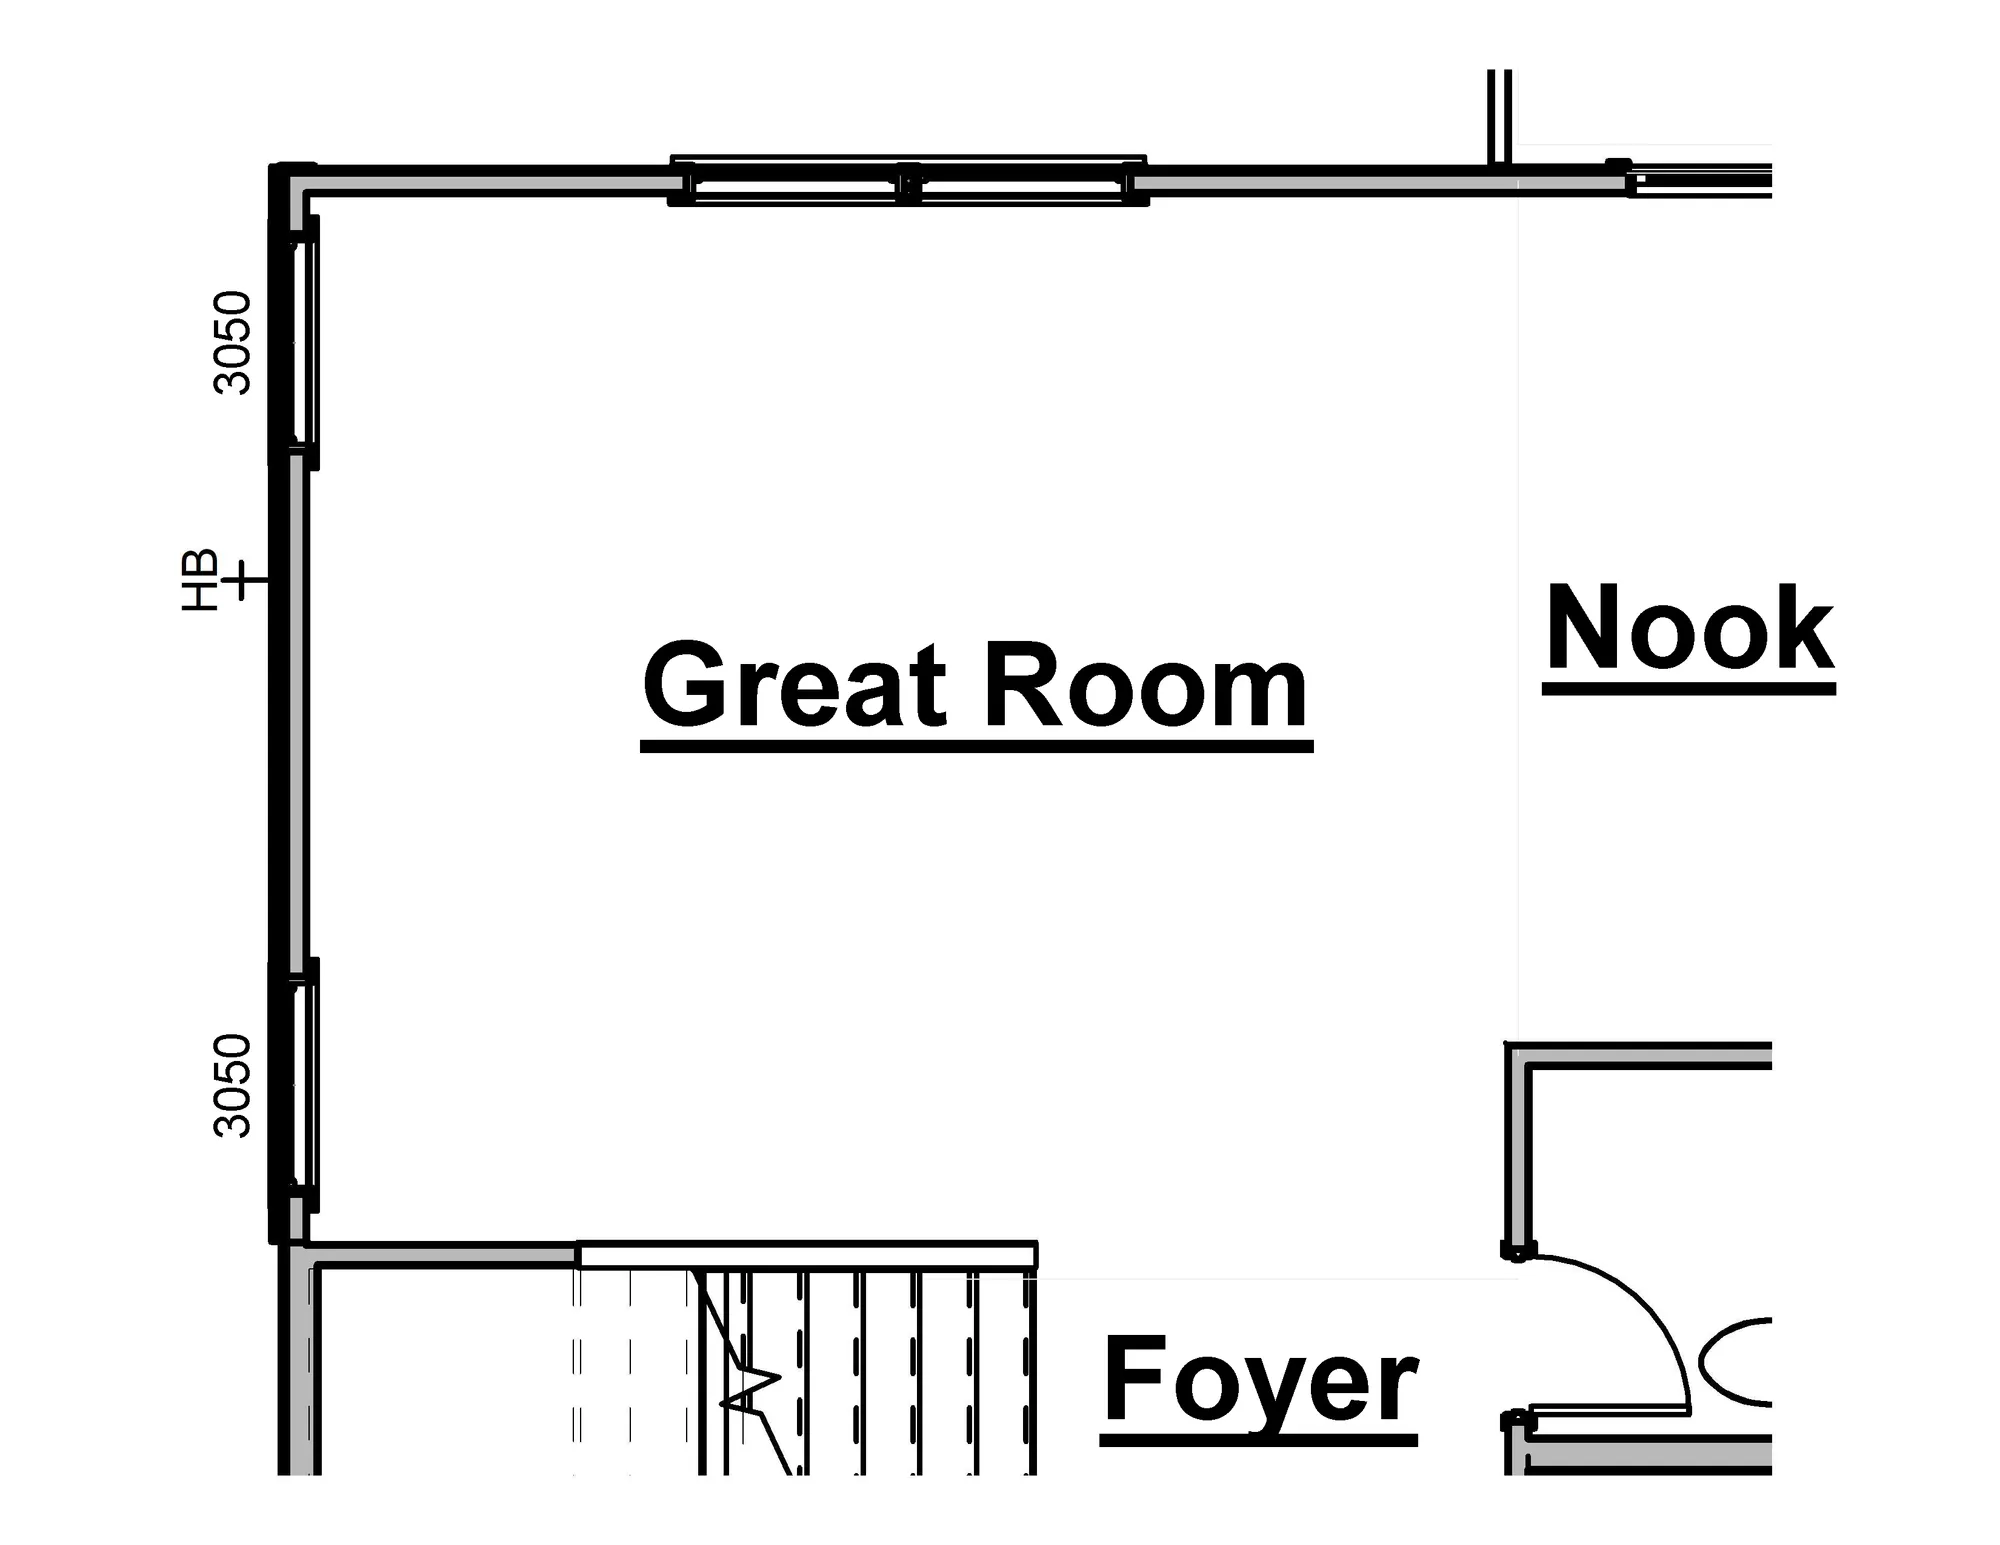 Great Room - Windows Option - undefined